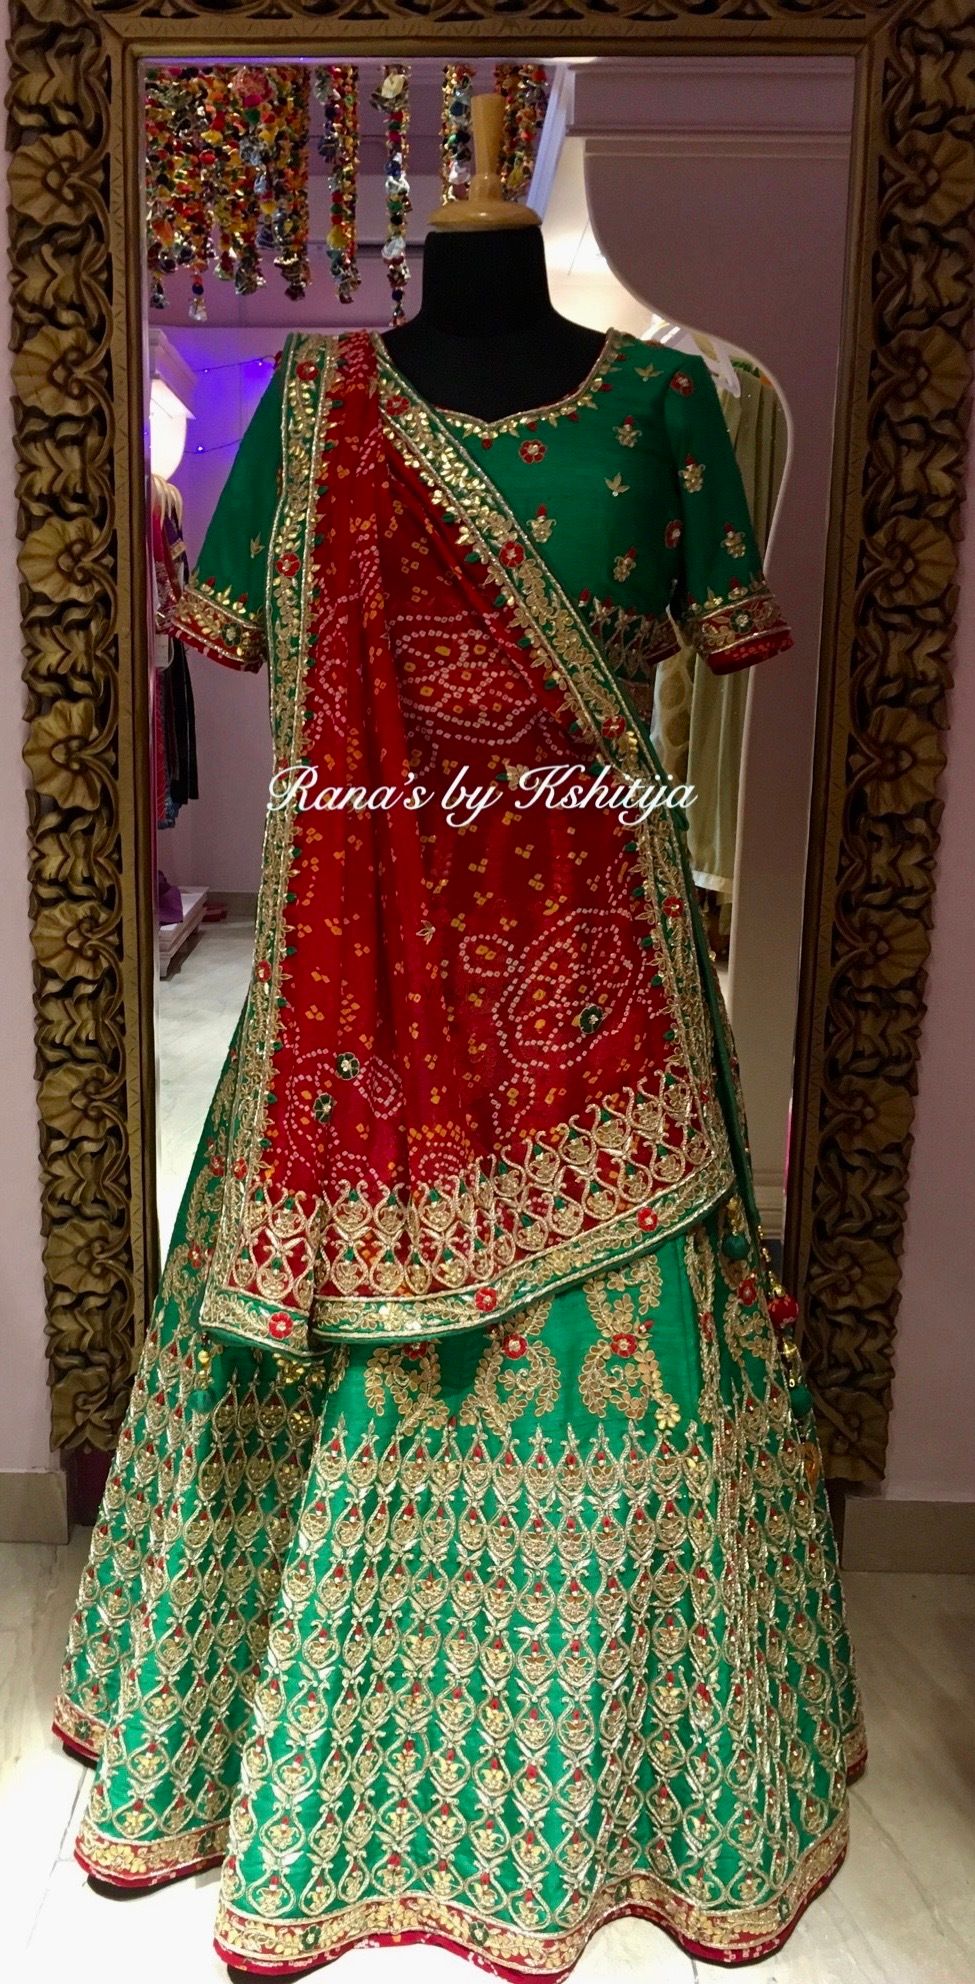 Photo From LATEST FOR THE UPCOMING WEDDING SEASON - By RANA'S by Kshitija